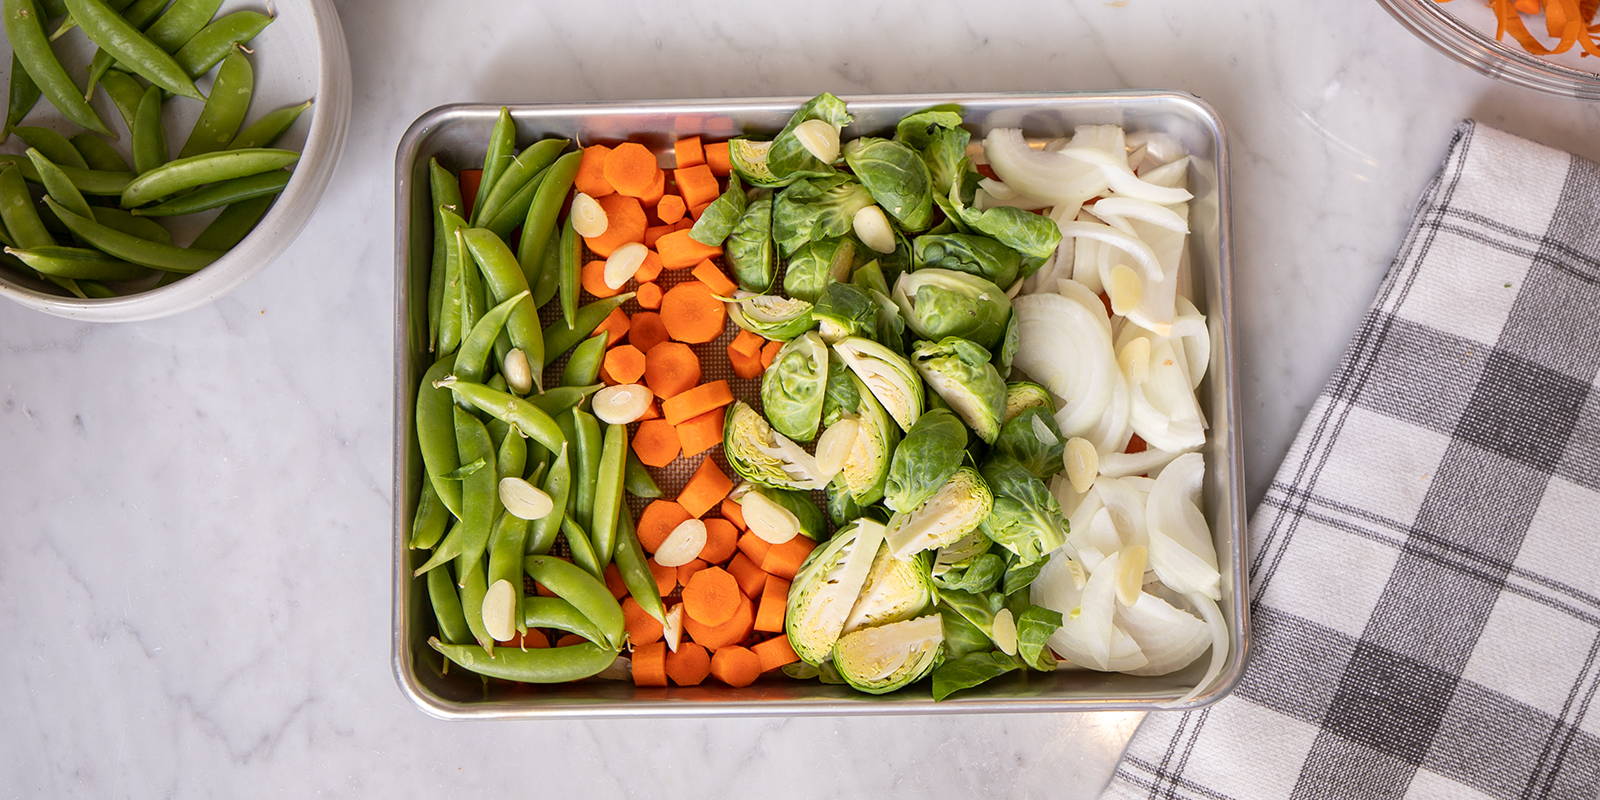 Small sheet pan recipe with vegetables like snow peas, carrots, Brussel sprouts, and onions.